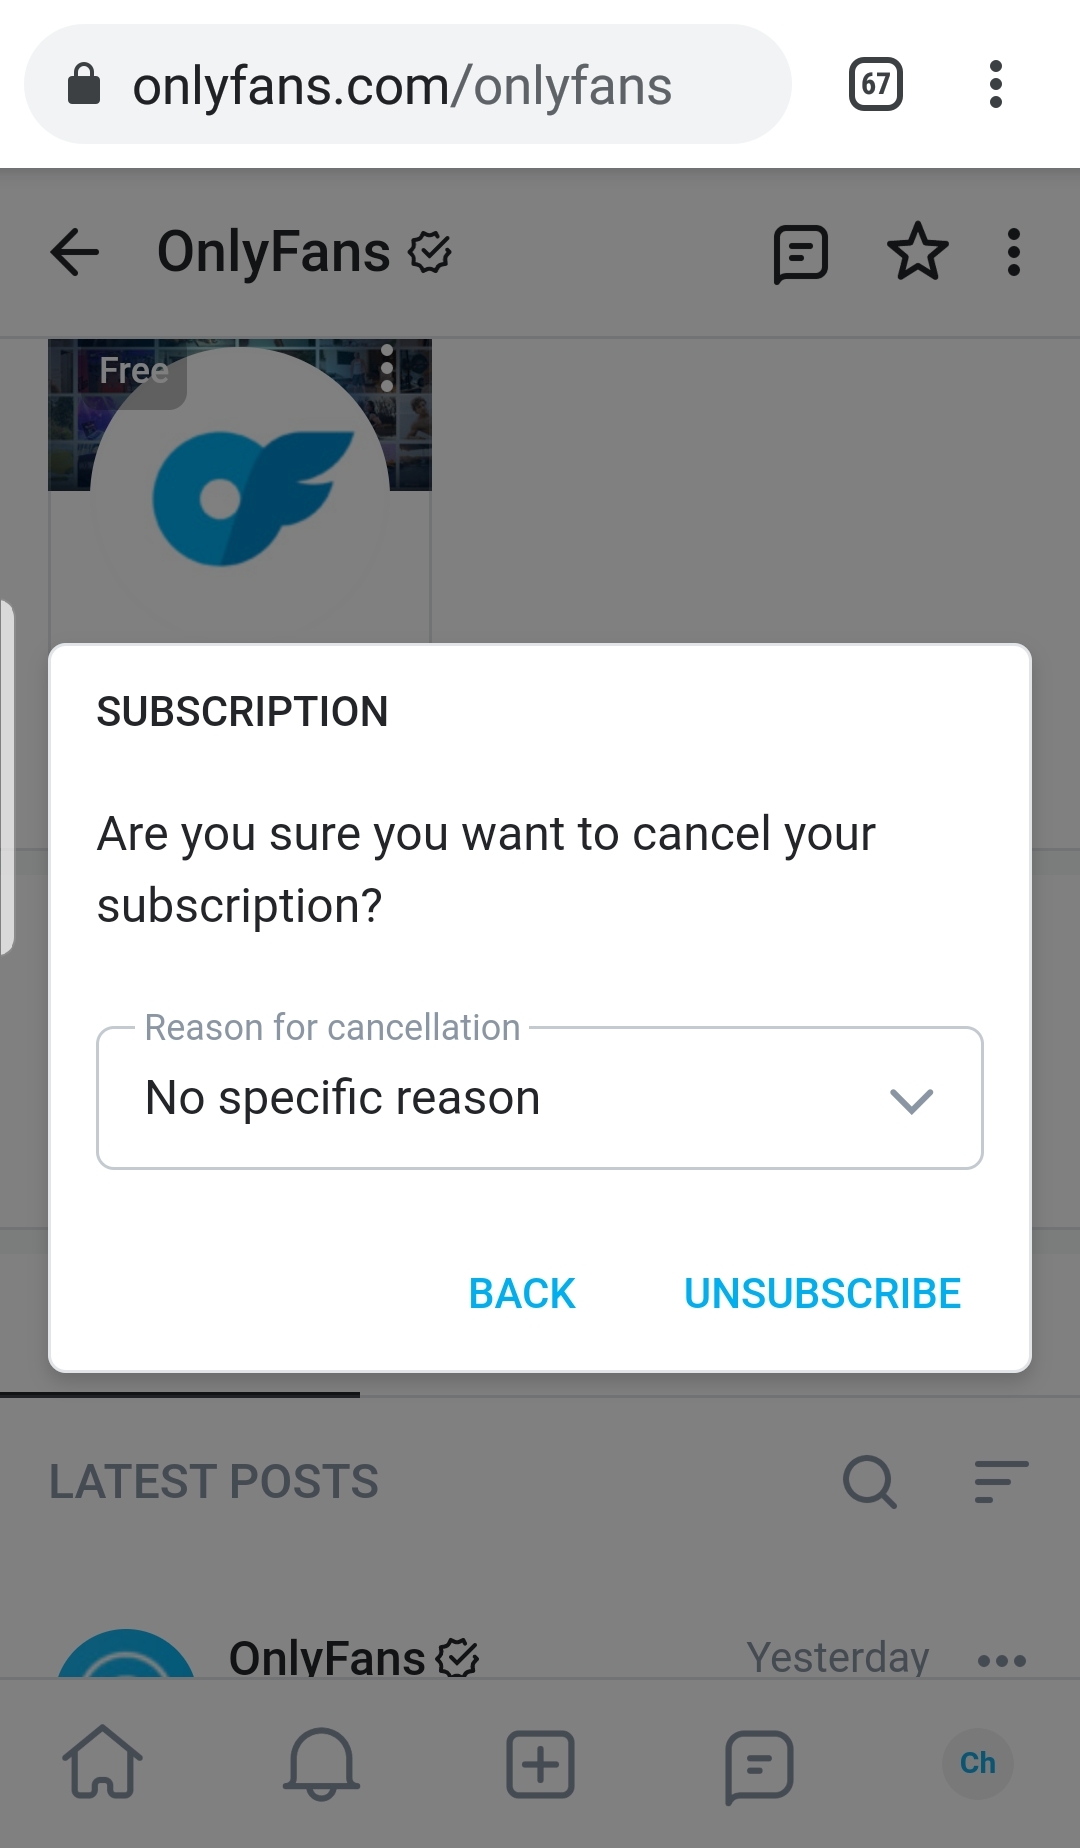 How to tell how many subscribers onlyfans